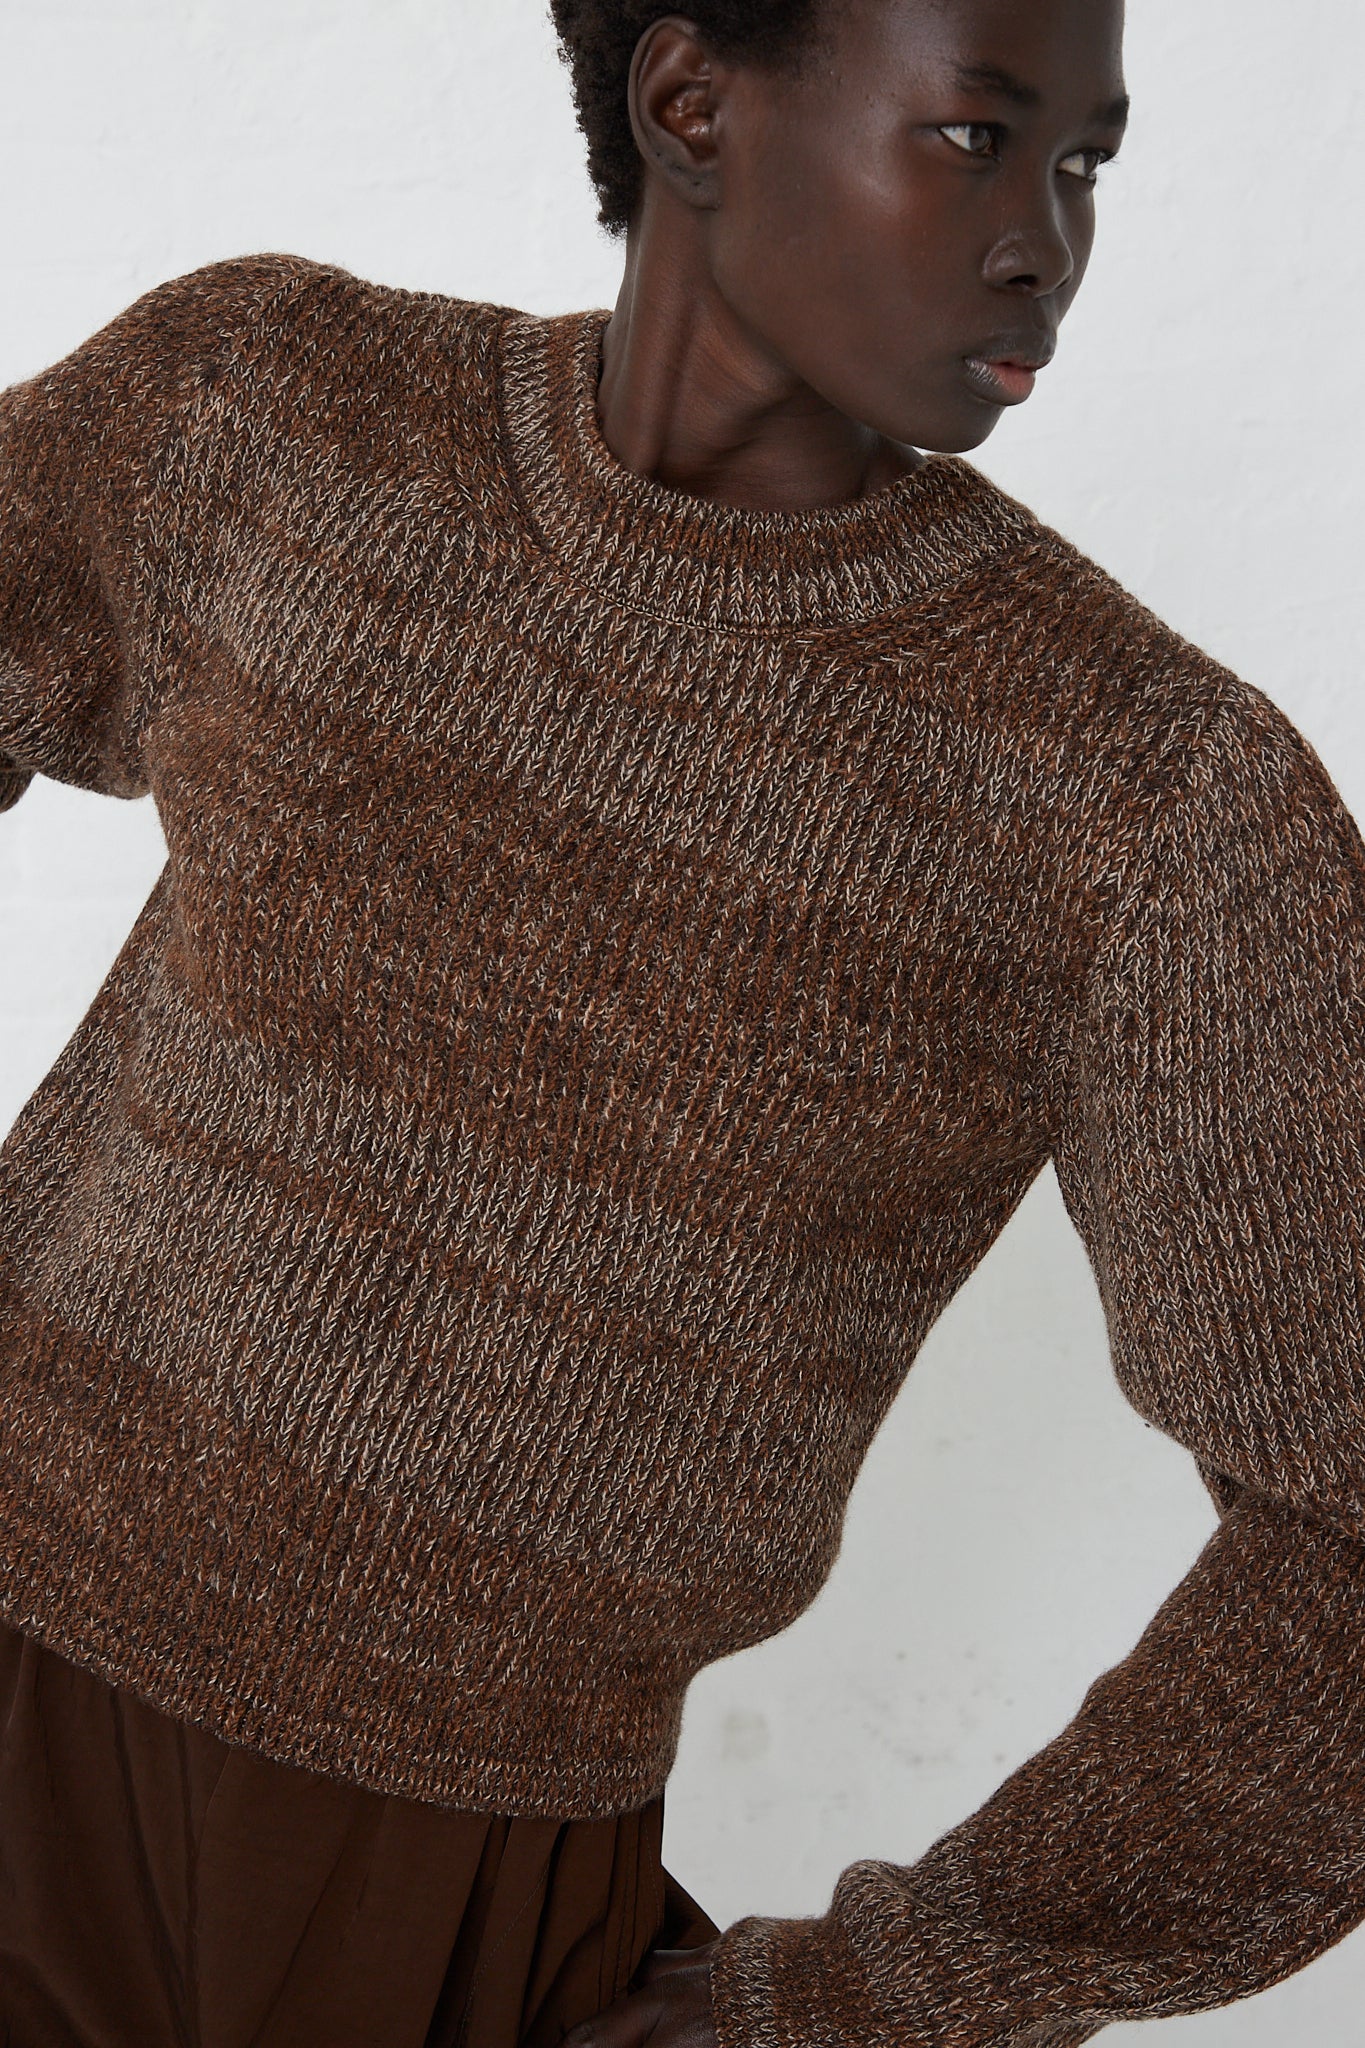 A model wearing a Curved Sleeve Sweater in Oak made by Veronique Leroy, a relaxed fit brown sweater made of virgin wool.